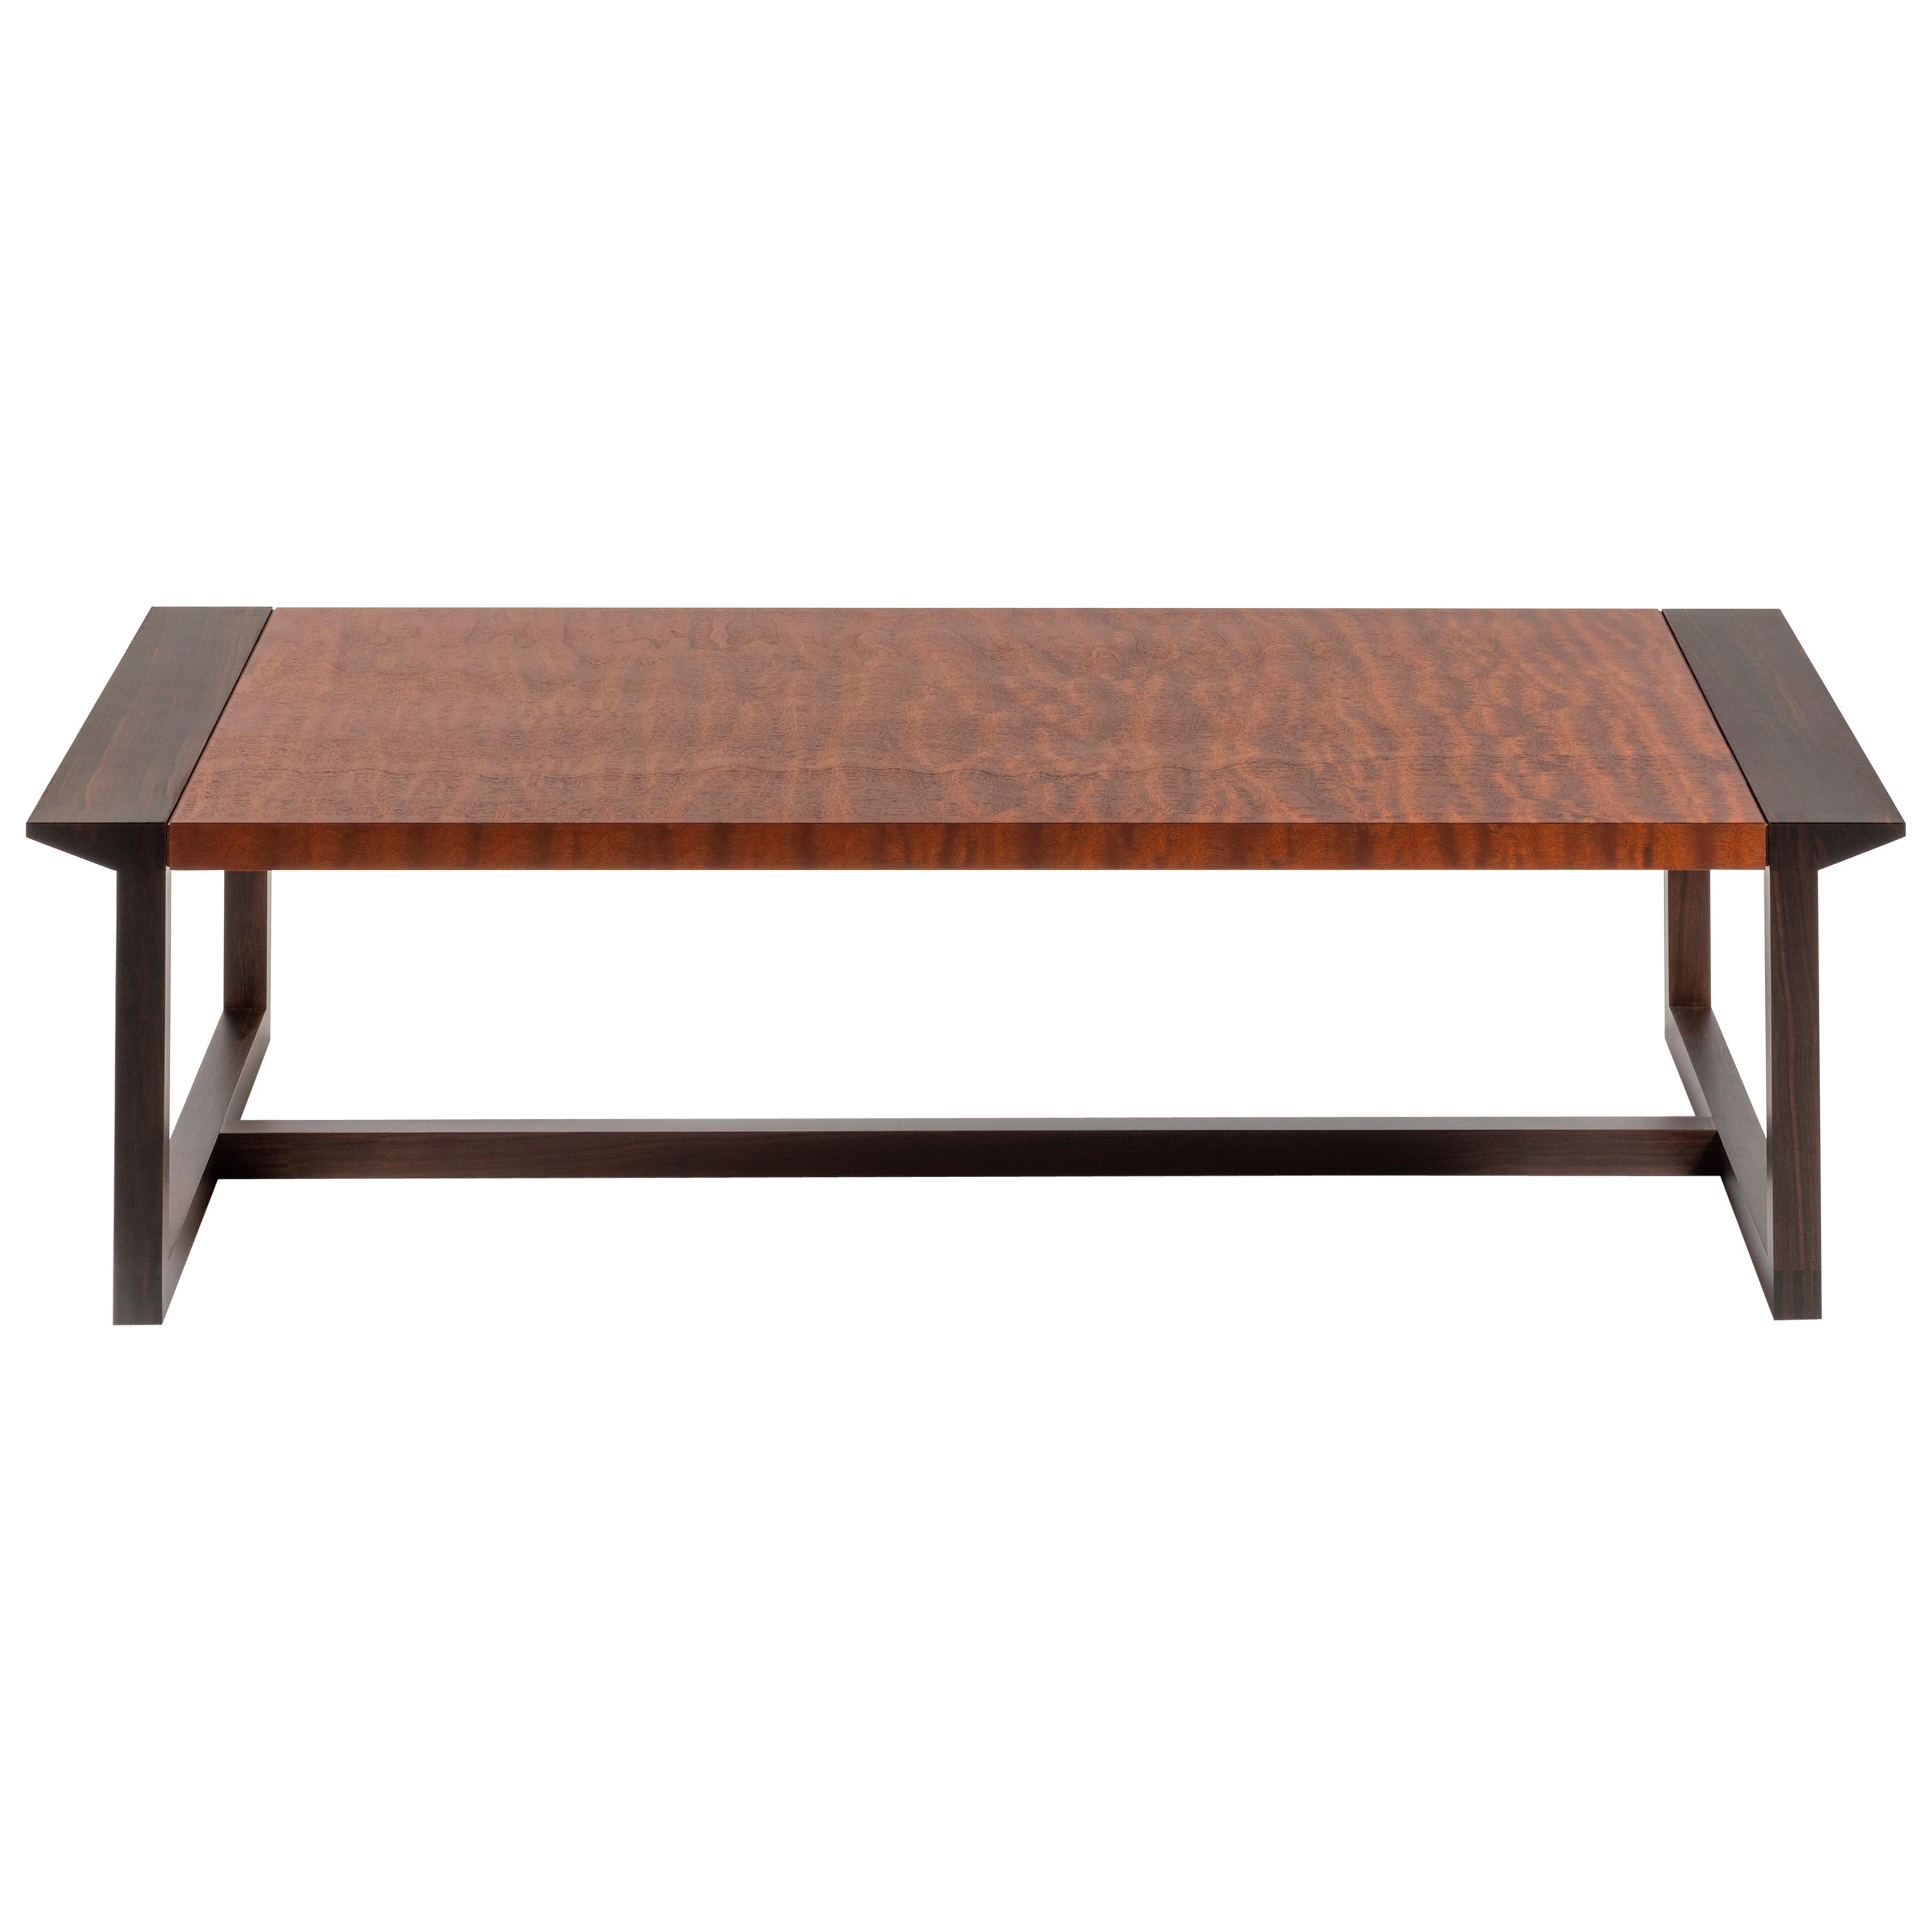 Ebony and Mahogany Pommelè Large Coffee Table Cmp Design for Giordano Viganò For Sale